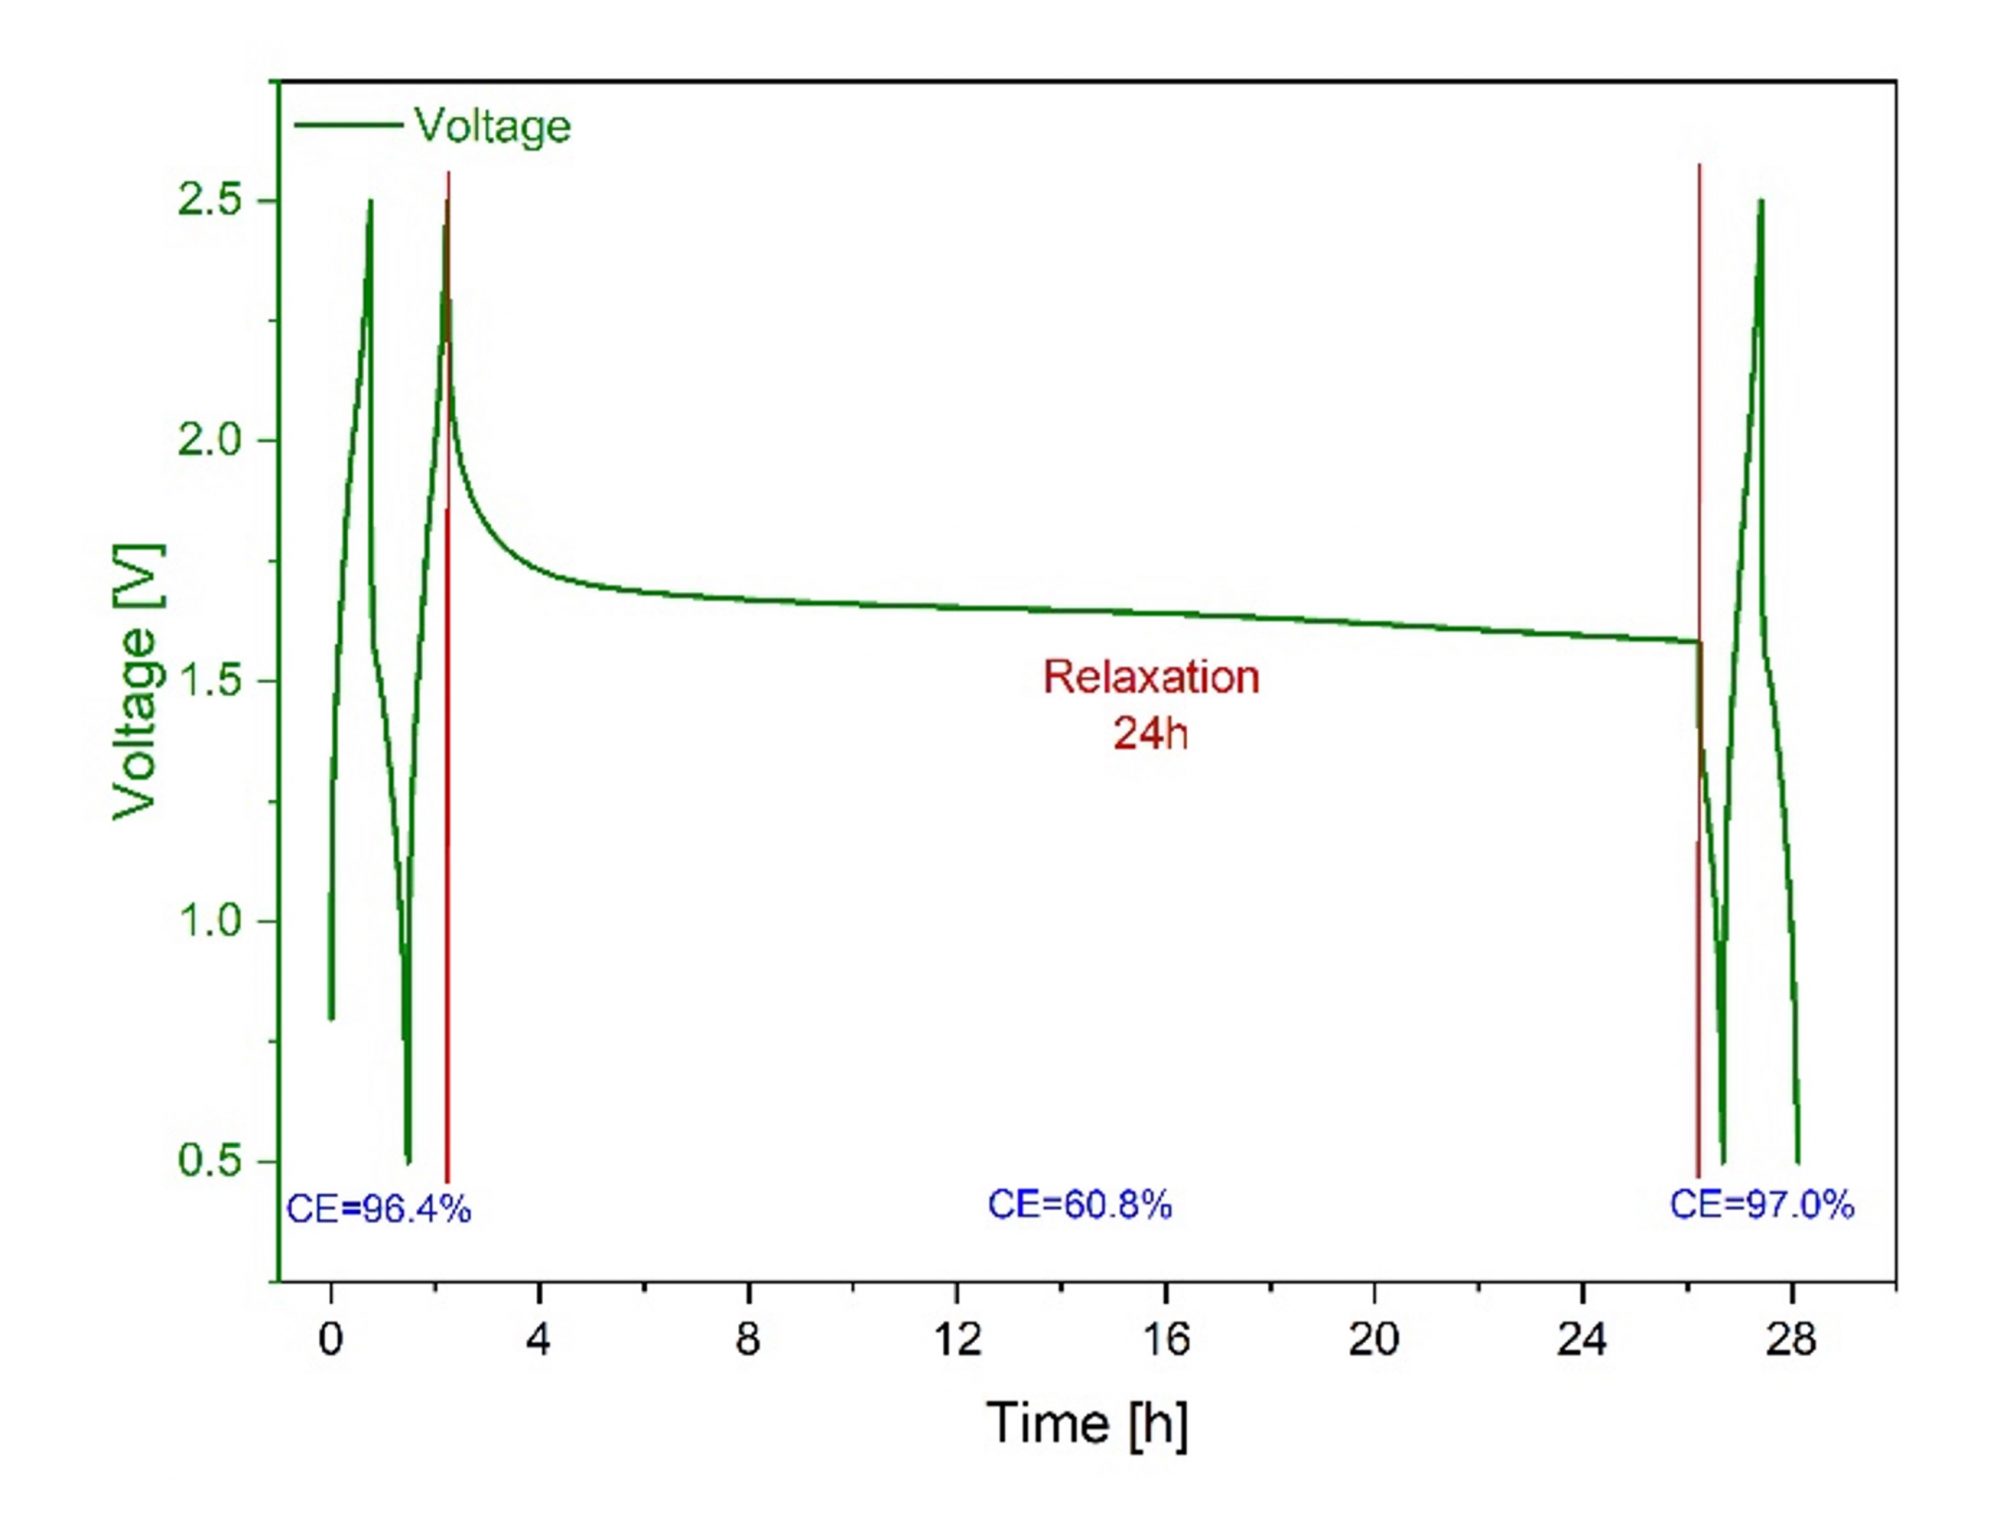 Figure 2: 24 h self-discharge measurement of Mg coin cells during charging and discharging at 1.0 C rate.